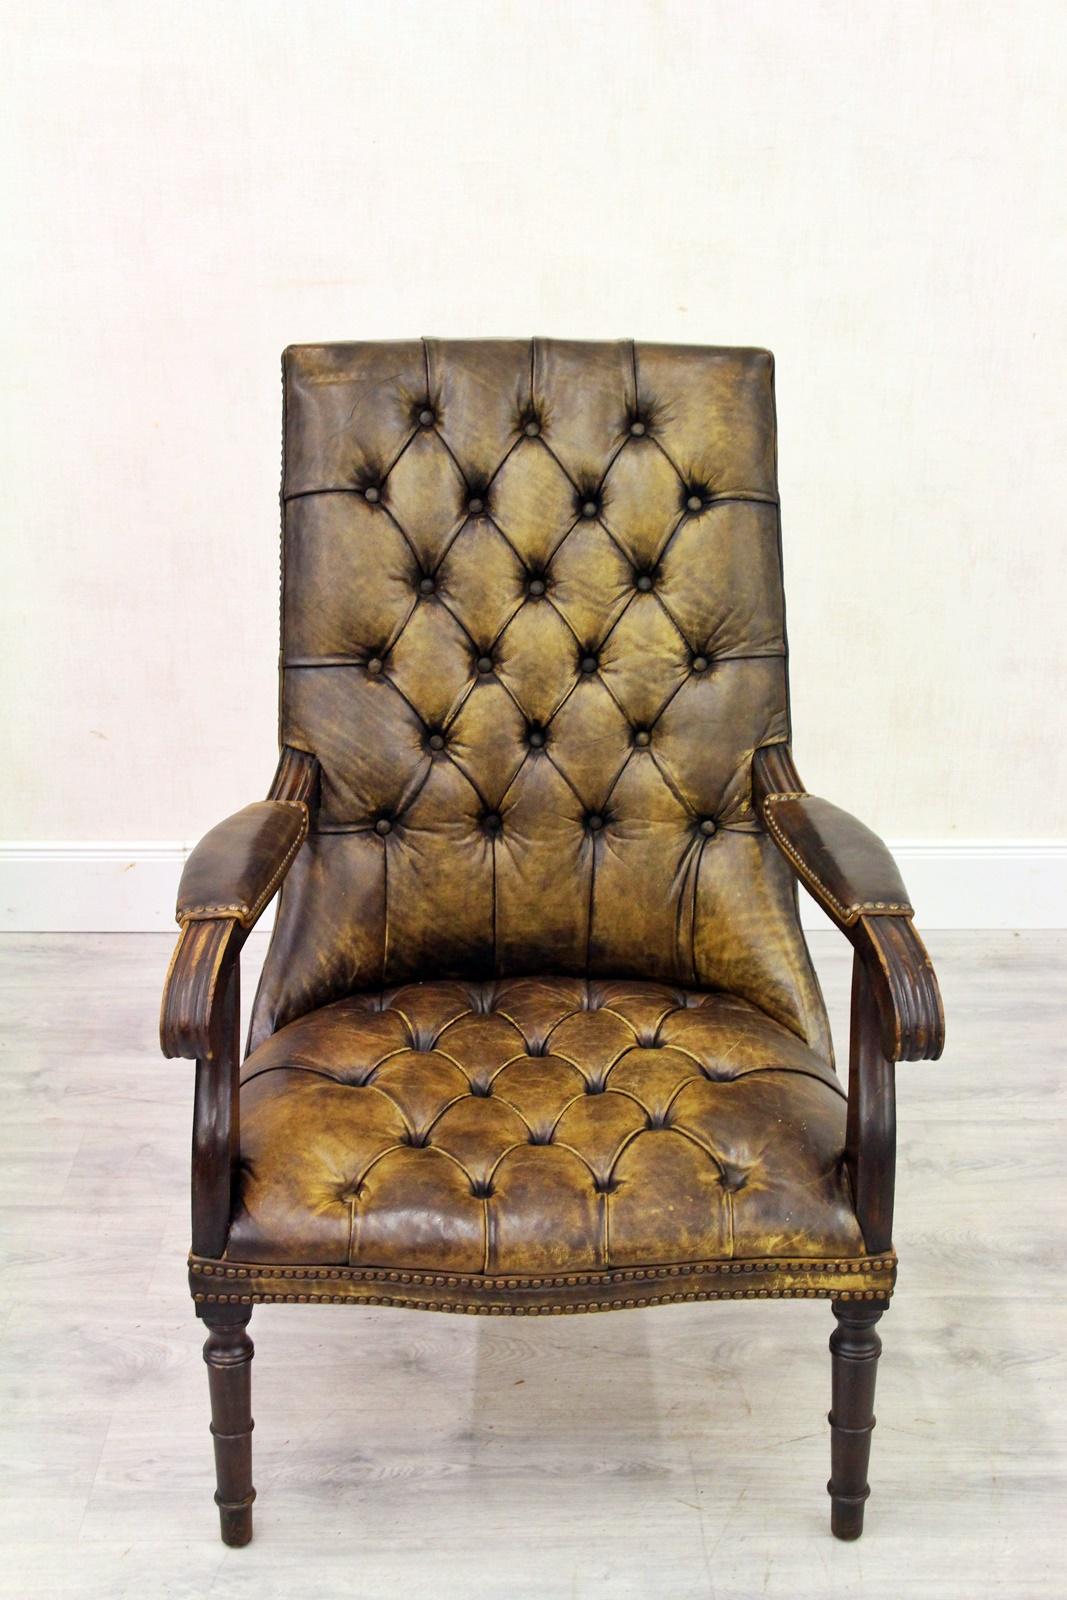 4 Chesterfield armchairs (rare about 100 years old)
The shape and the age is very rare and special
wing chairs
Measures: Height 105cm, width 70cm, depth 80cm
Condition: The armchairs are in a very good condition for the age and still have the